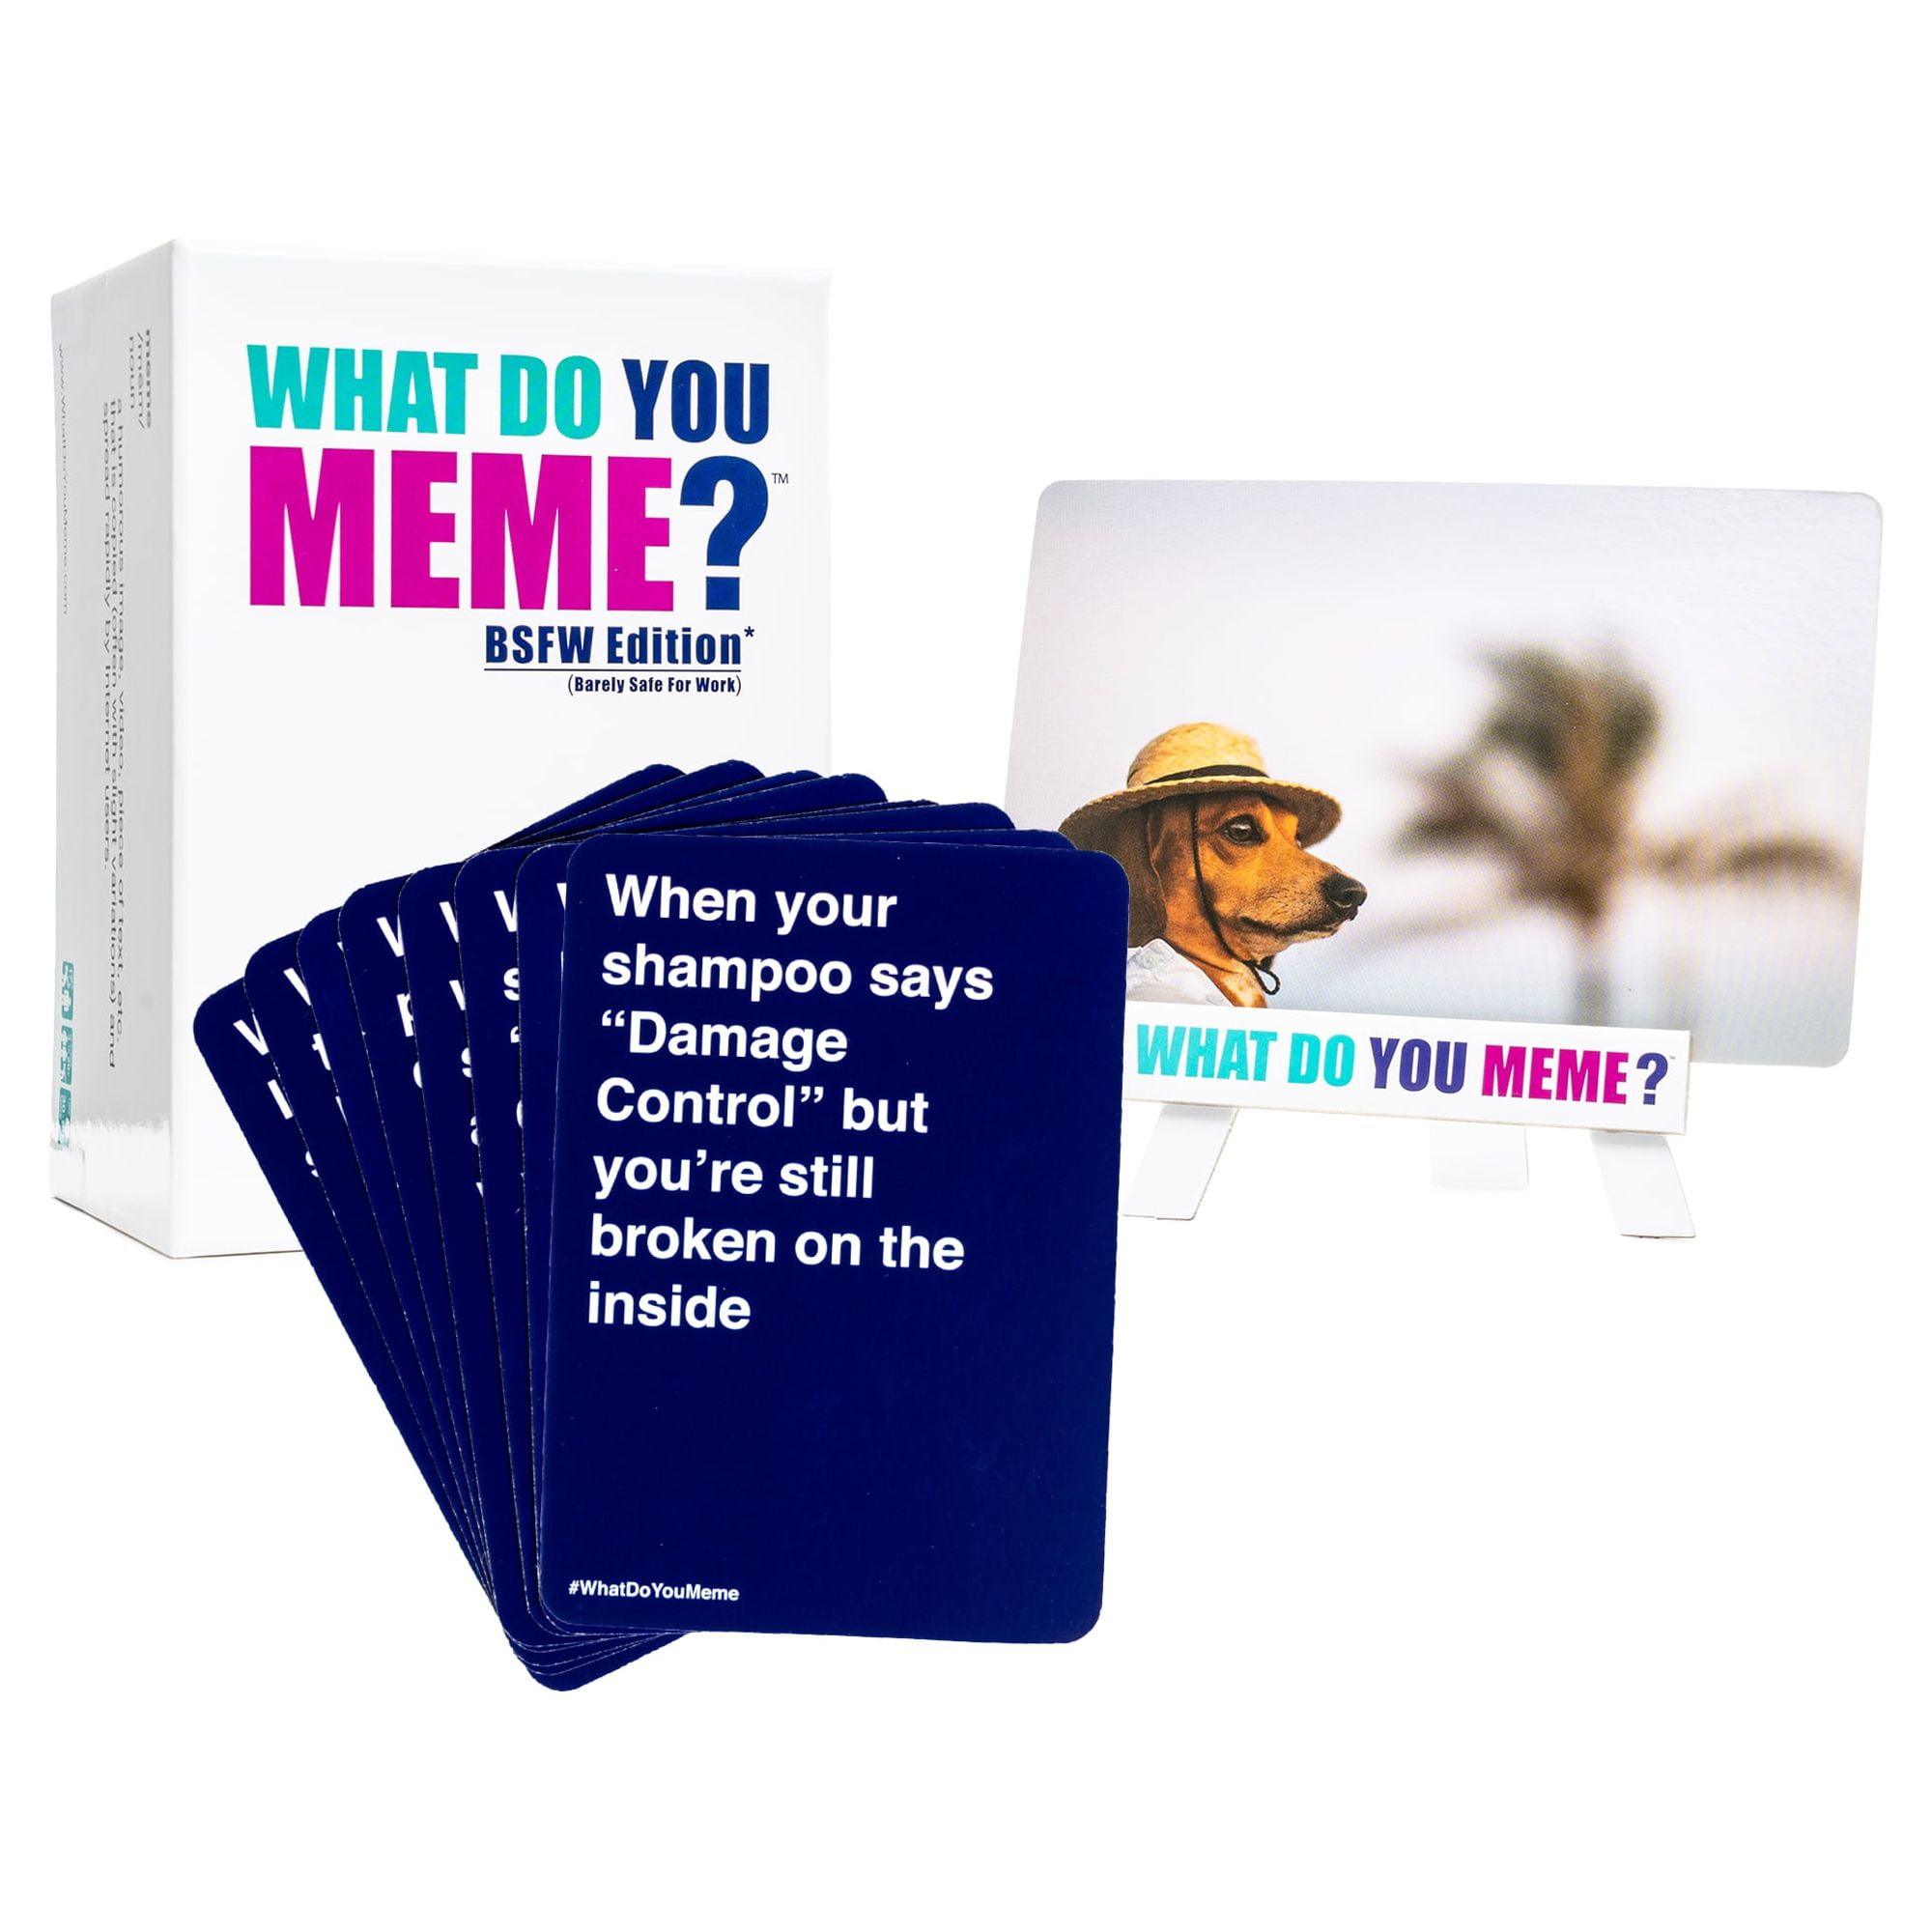 We Meme - Online Multiplayer Game inspired by the popular Party Game What  Do You Meme.